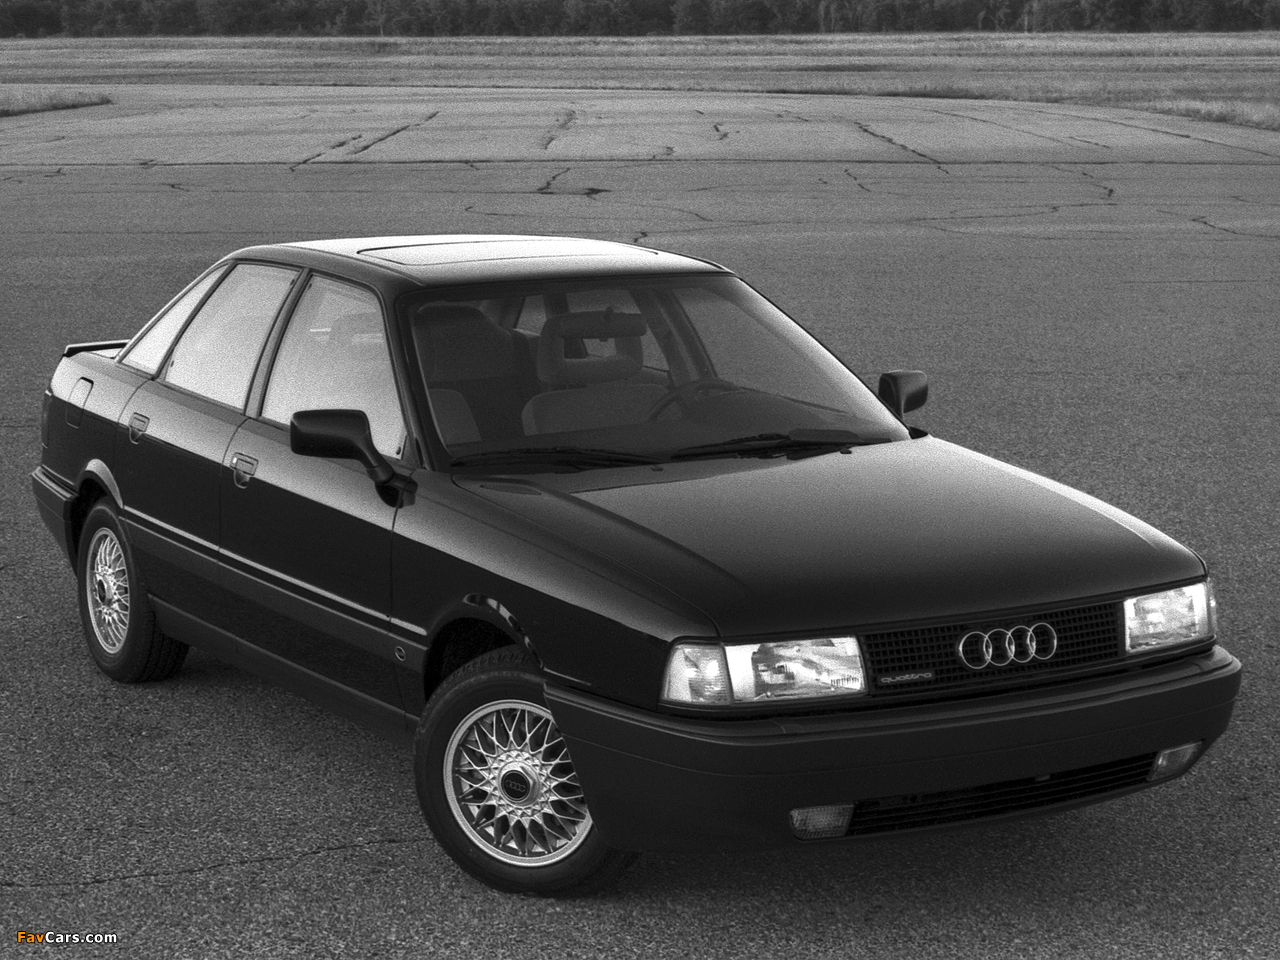 1992 Audi 80 16v quattro related infomation,specifications ...